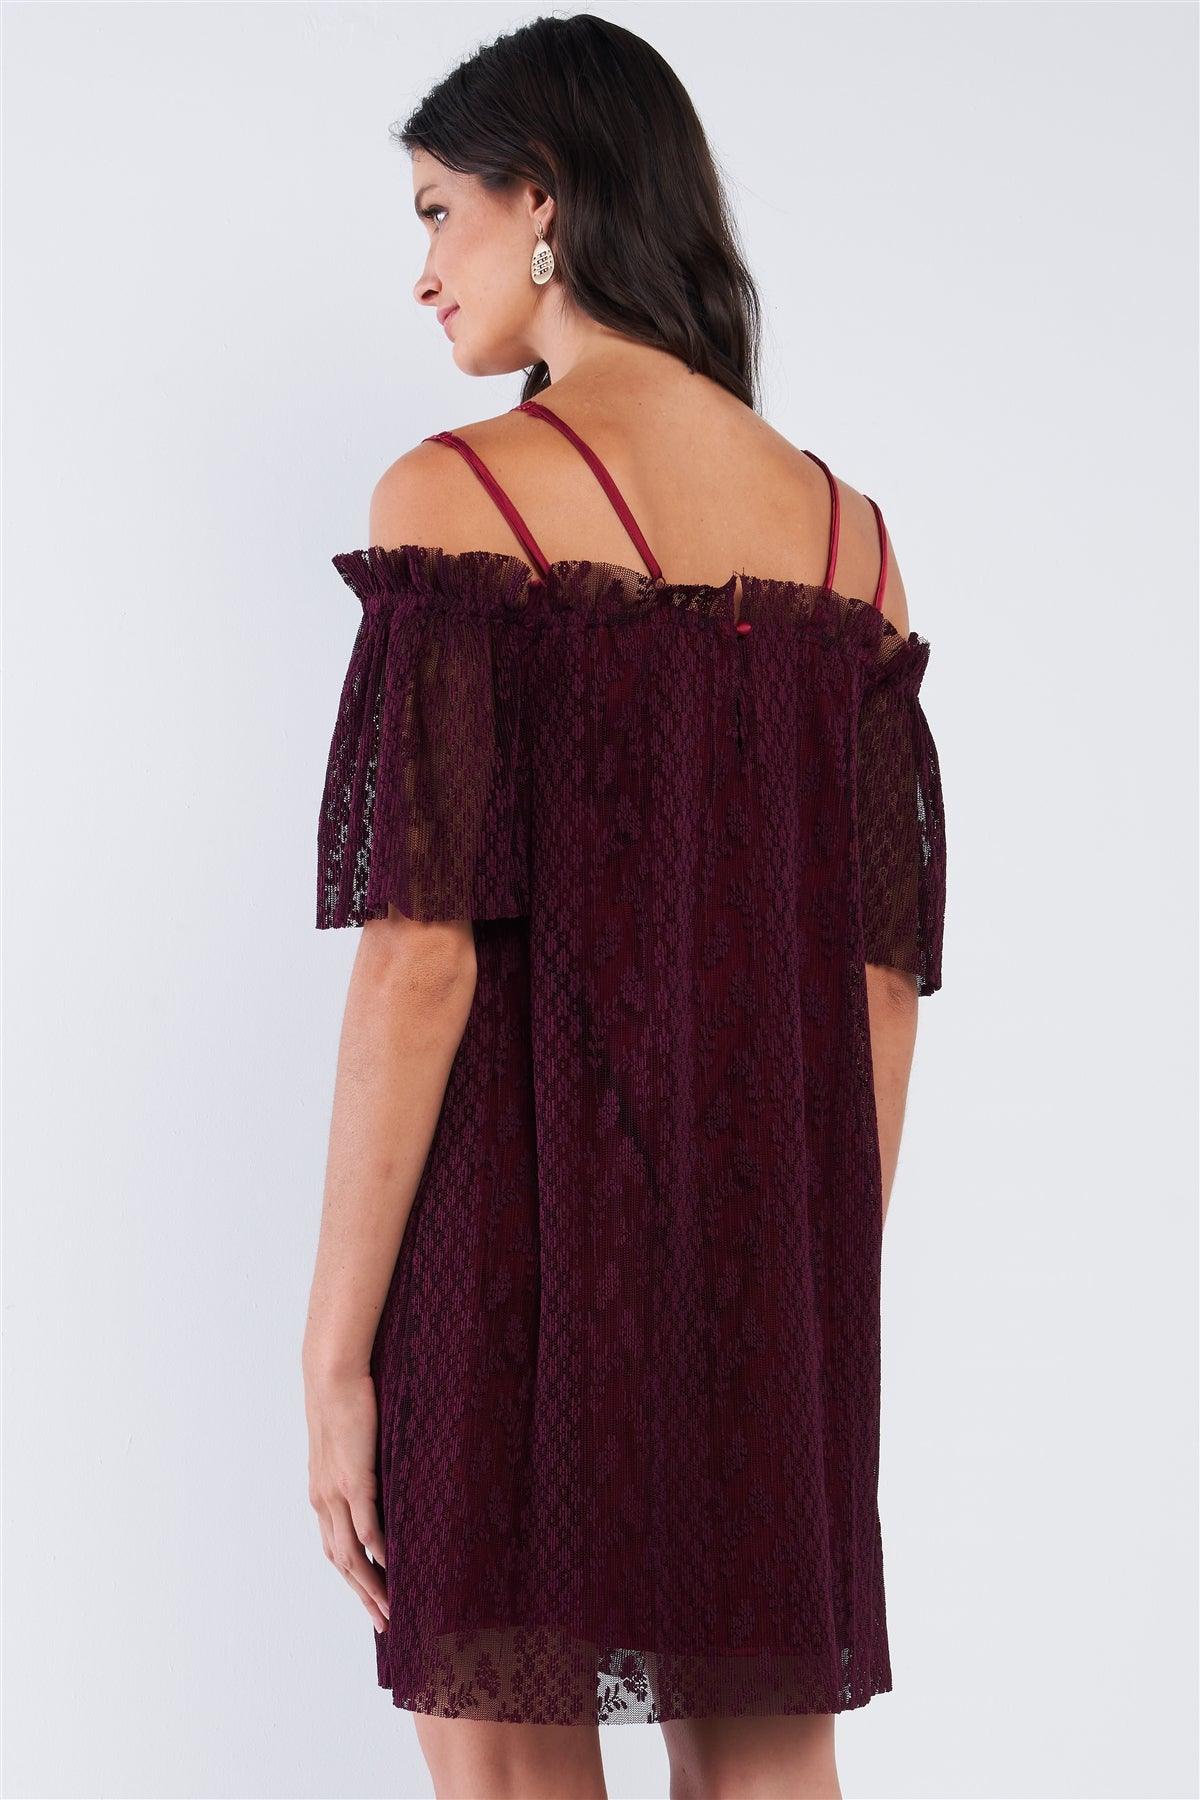 Wine Red Loose Printed Ribbed Mesh Off-The-Shoulder Tube Mini Dress With Satin Multi Straps /1-1-2